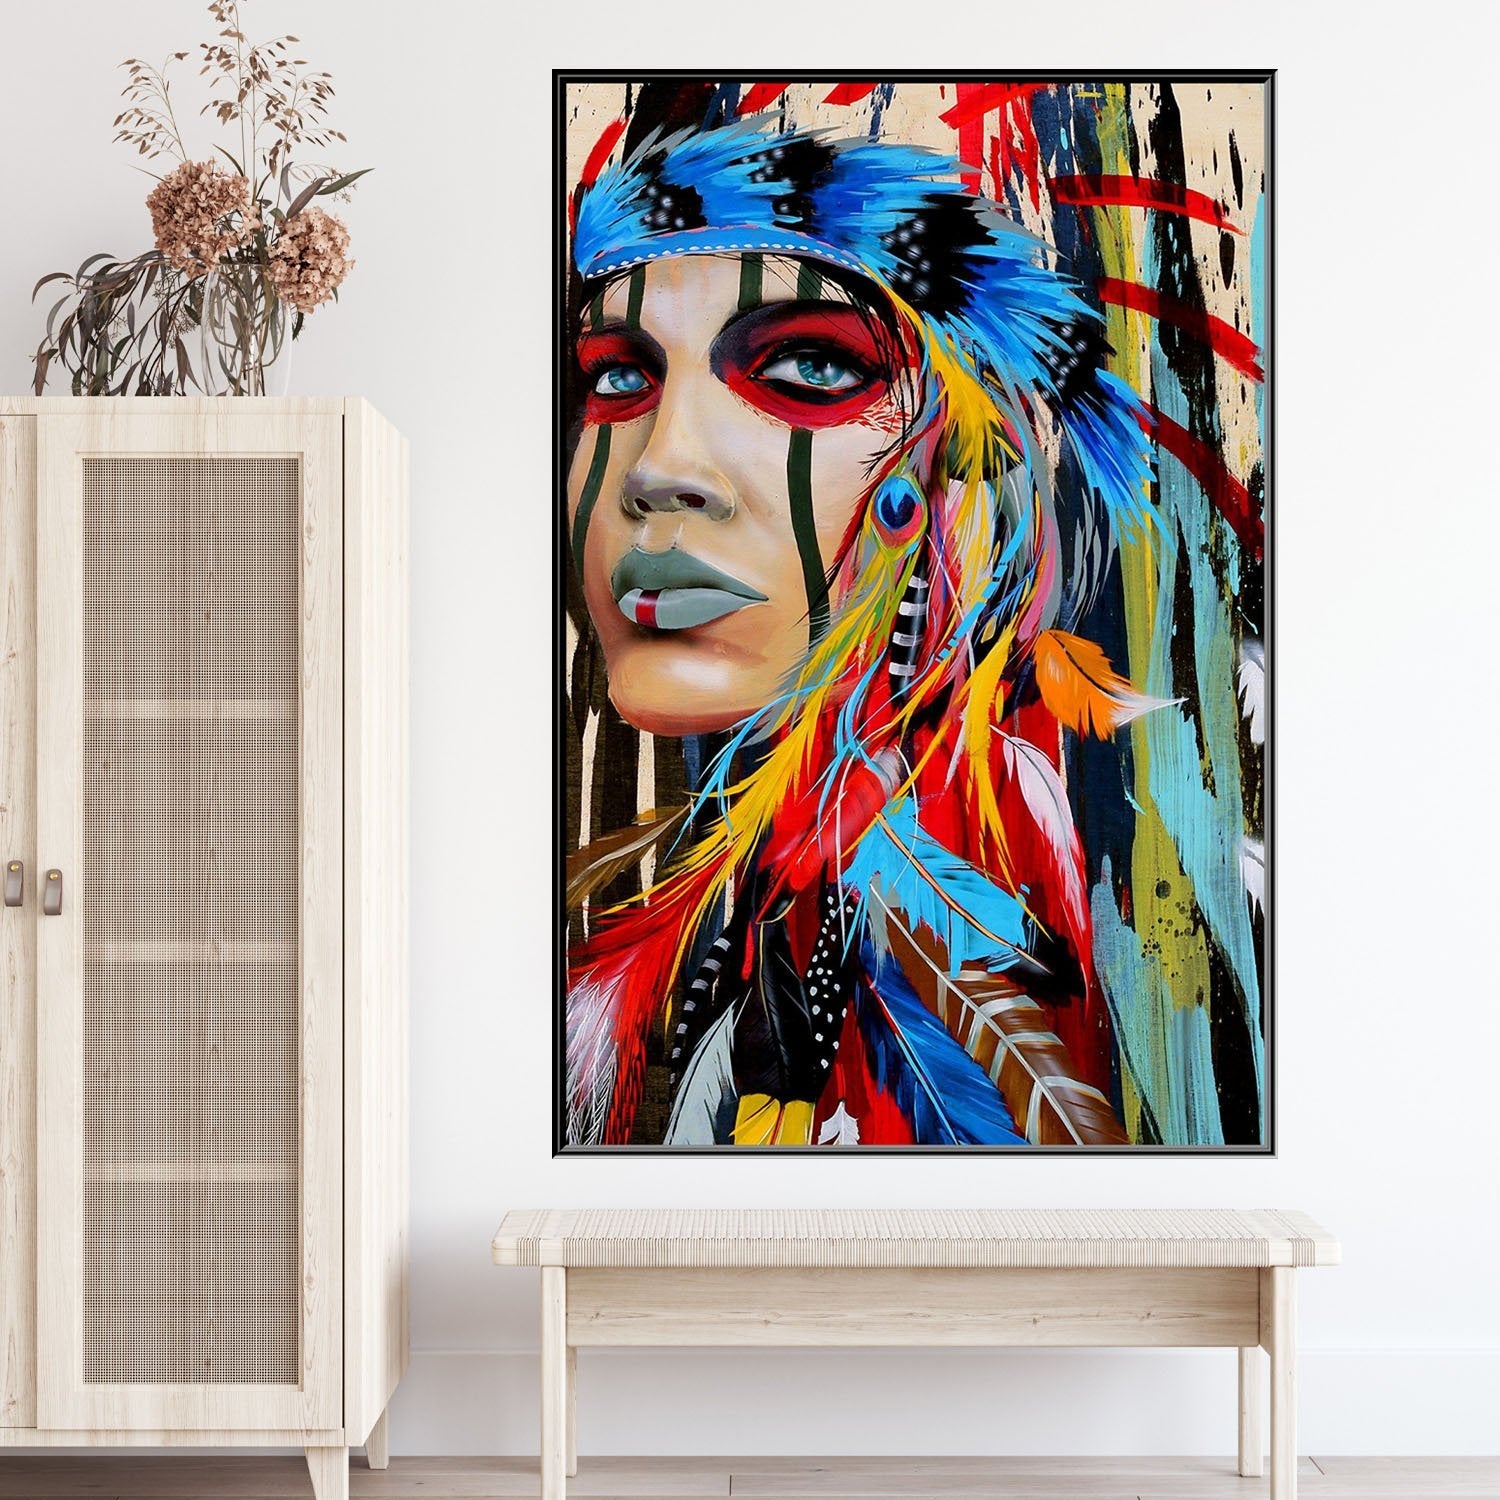 https://cdn.shopify.com/s/files/1/0387/9986/8044/products/RedIndianWomanCanvasPrintStretched-1.jpg